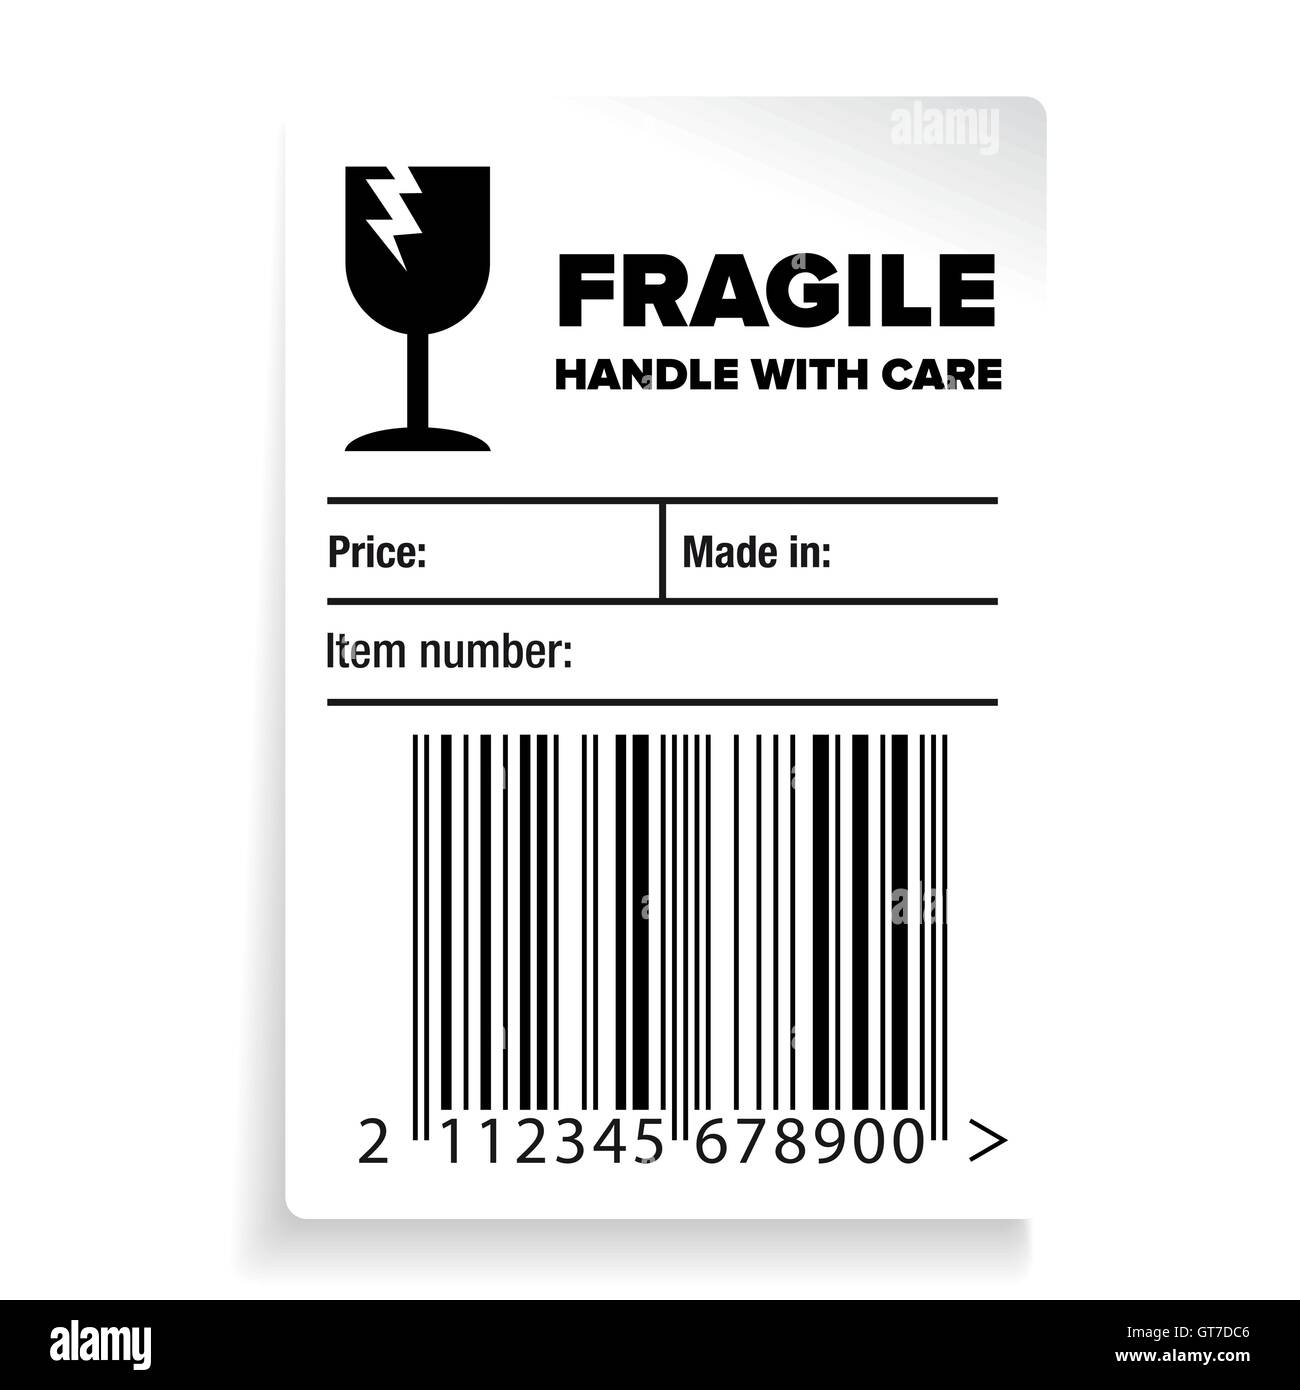 Fragile Barcode Packaging Label or sticker vector Stock Vector